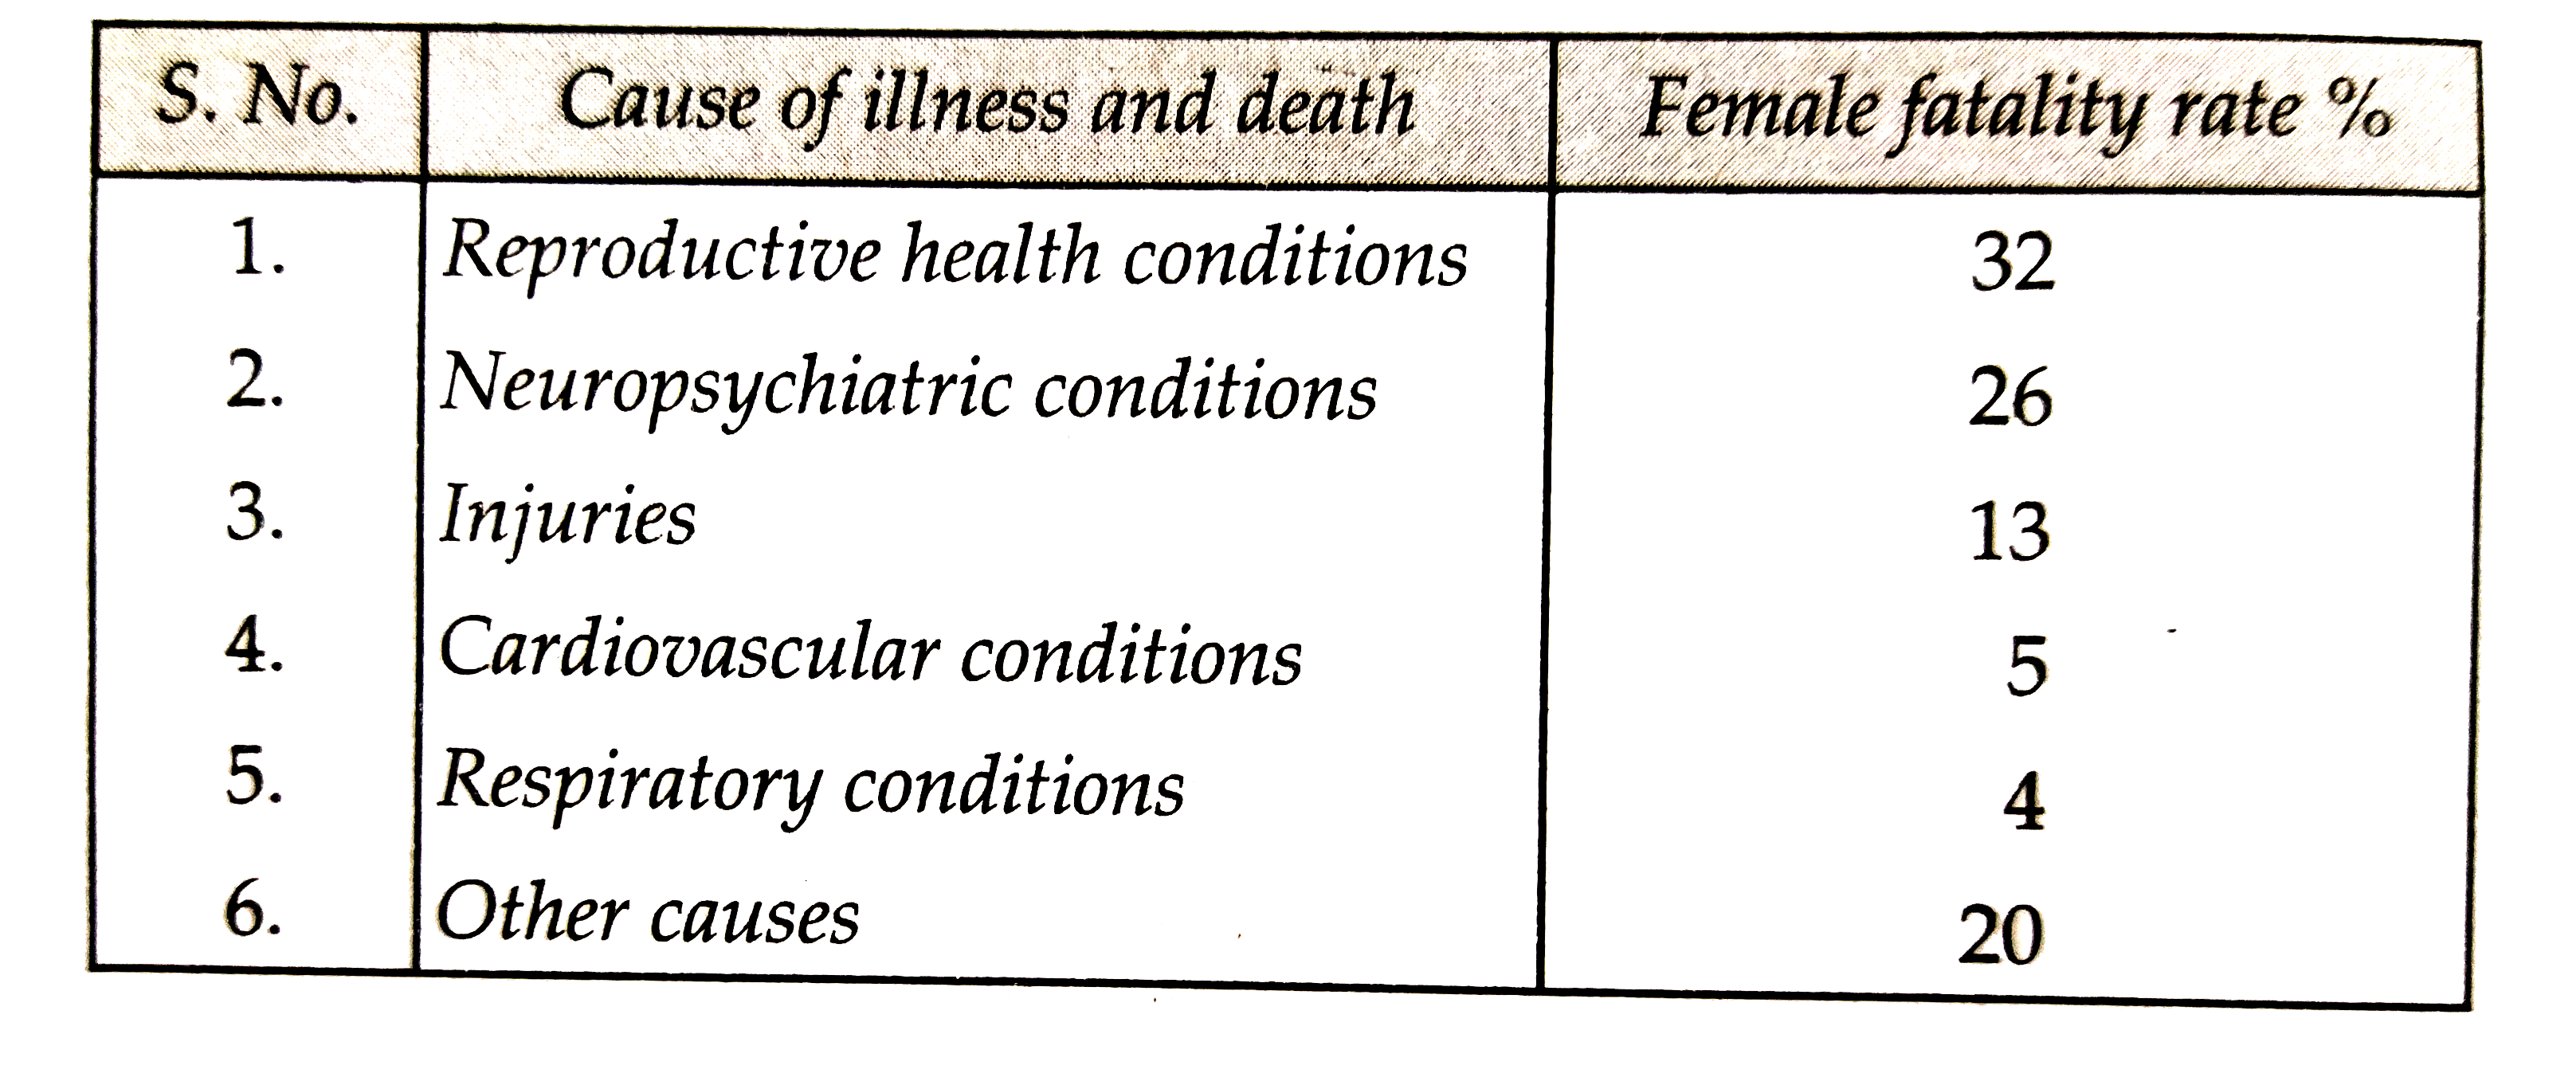 A survey conducted by an organisation for the cause of illness and death among the women between the ages 15-44 (in years) worldwide, found the following figure (in%):      (i) Represent the information given above graphically.   (ii) Which condition is the major cause of women's ill health and death worldwide?